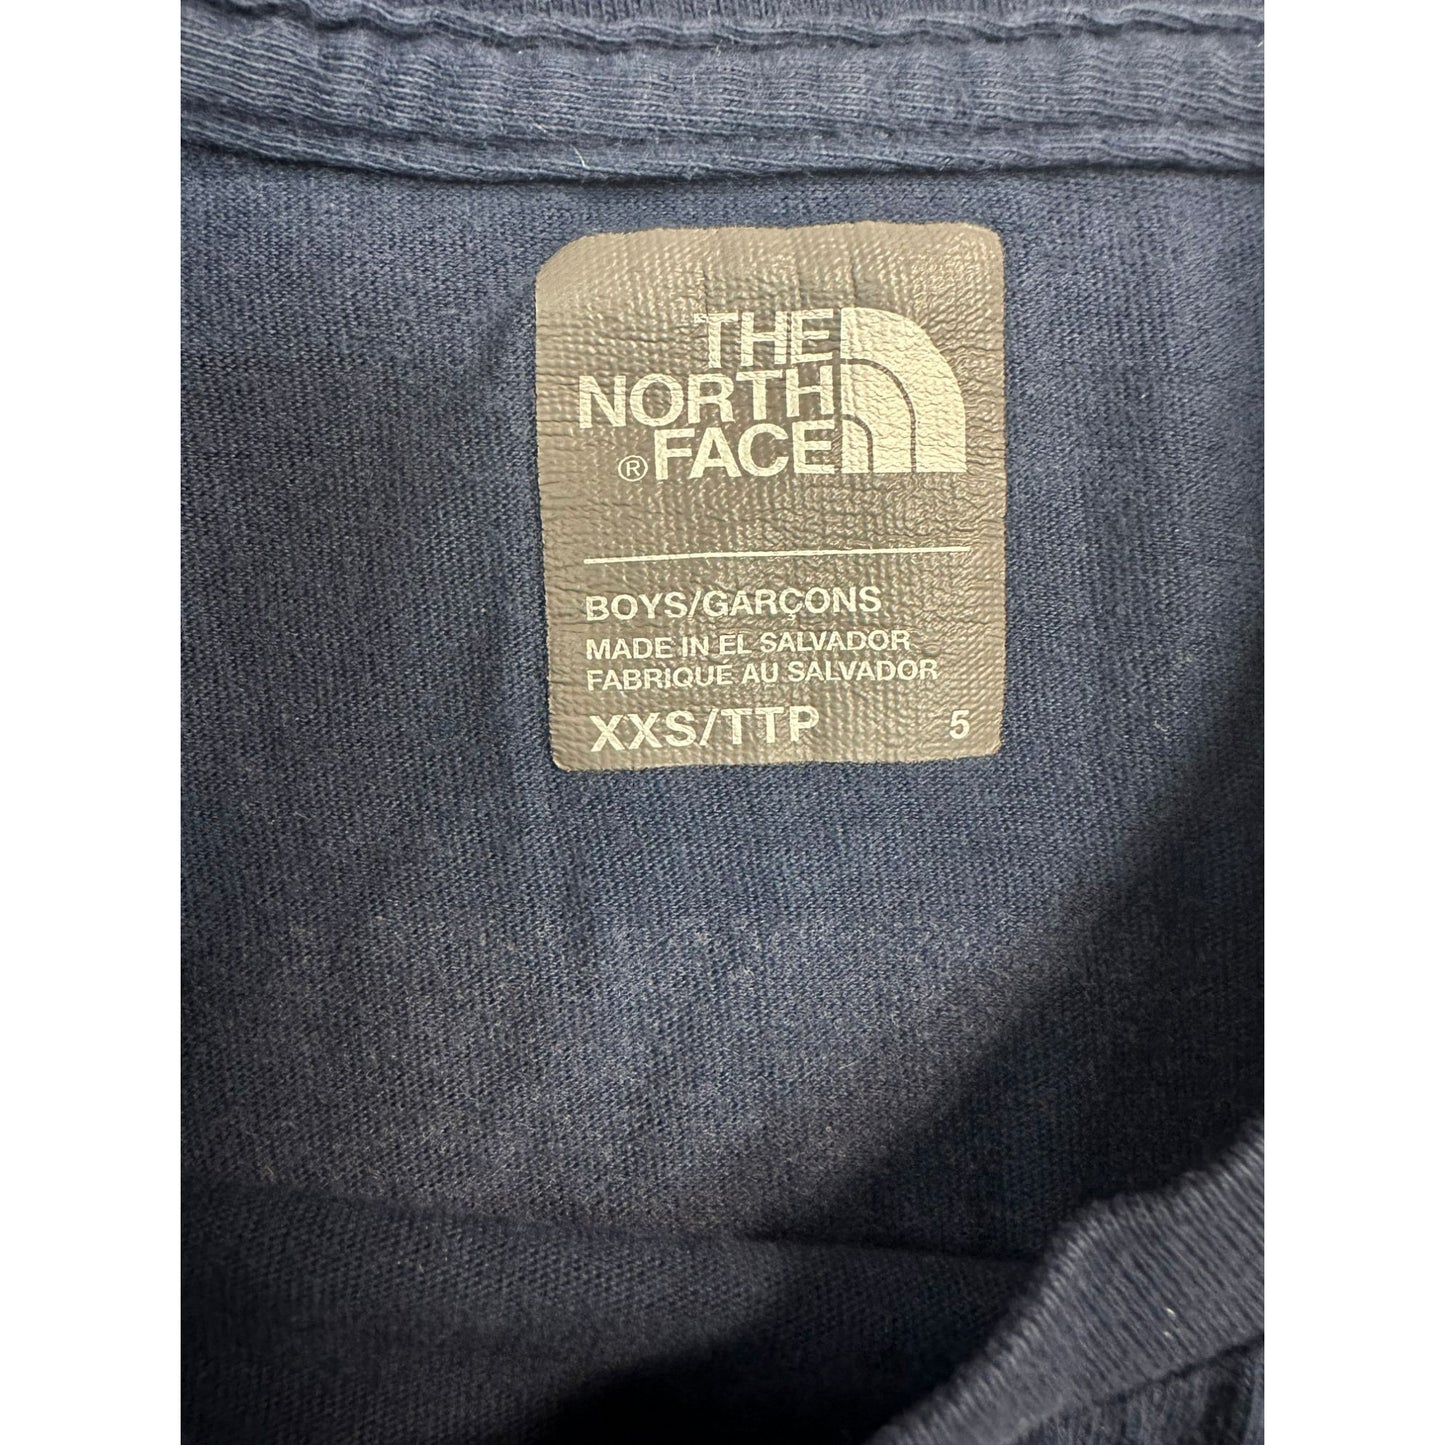 THE NORTH FACE Kid’s Tee